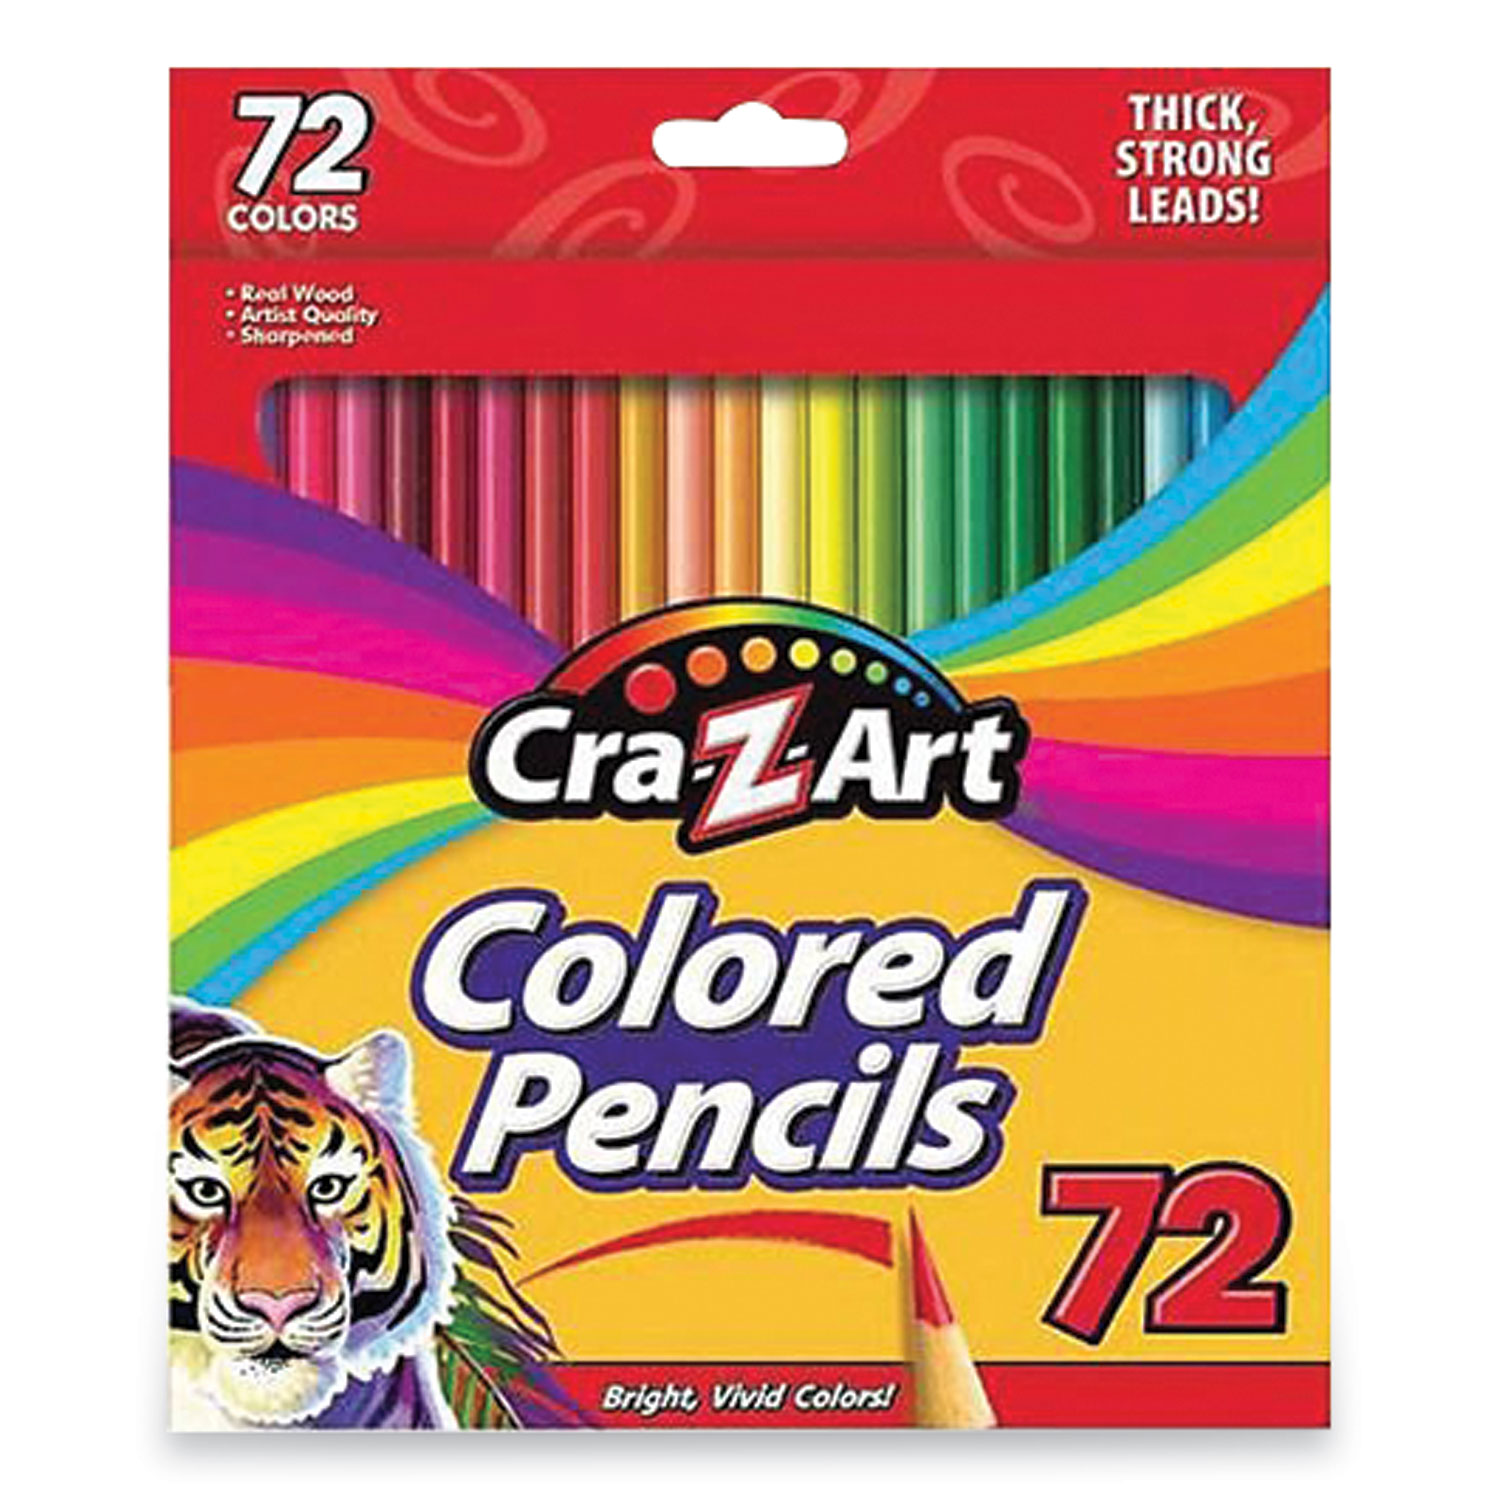 Cra-Z-Art Classic Colored Pencils, 72 Count, Multicolor, Beginner Child to Adult, Back to School - image 1 of 2